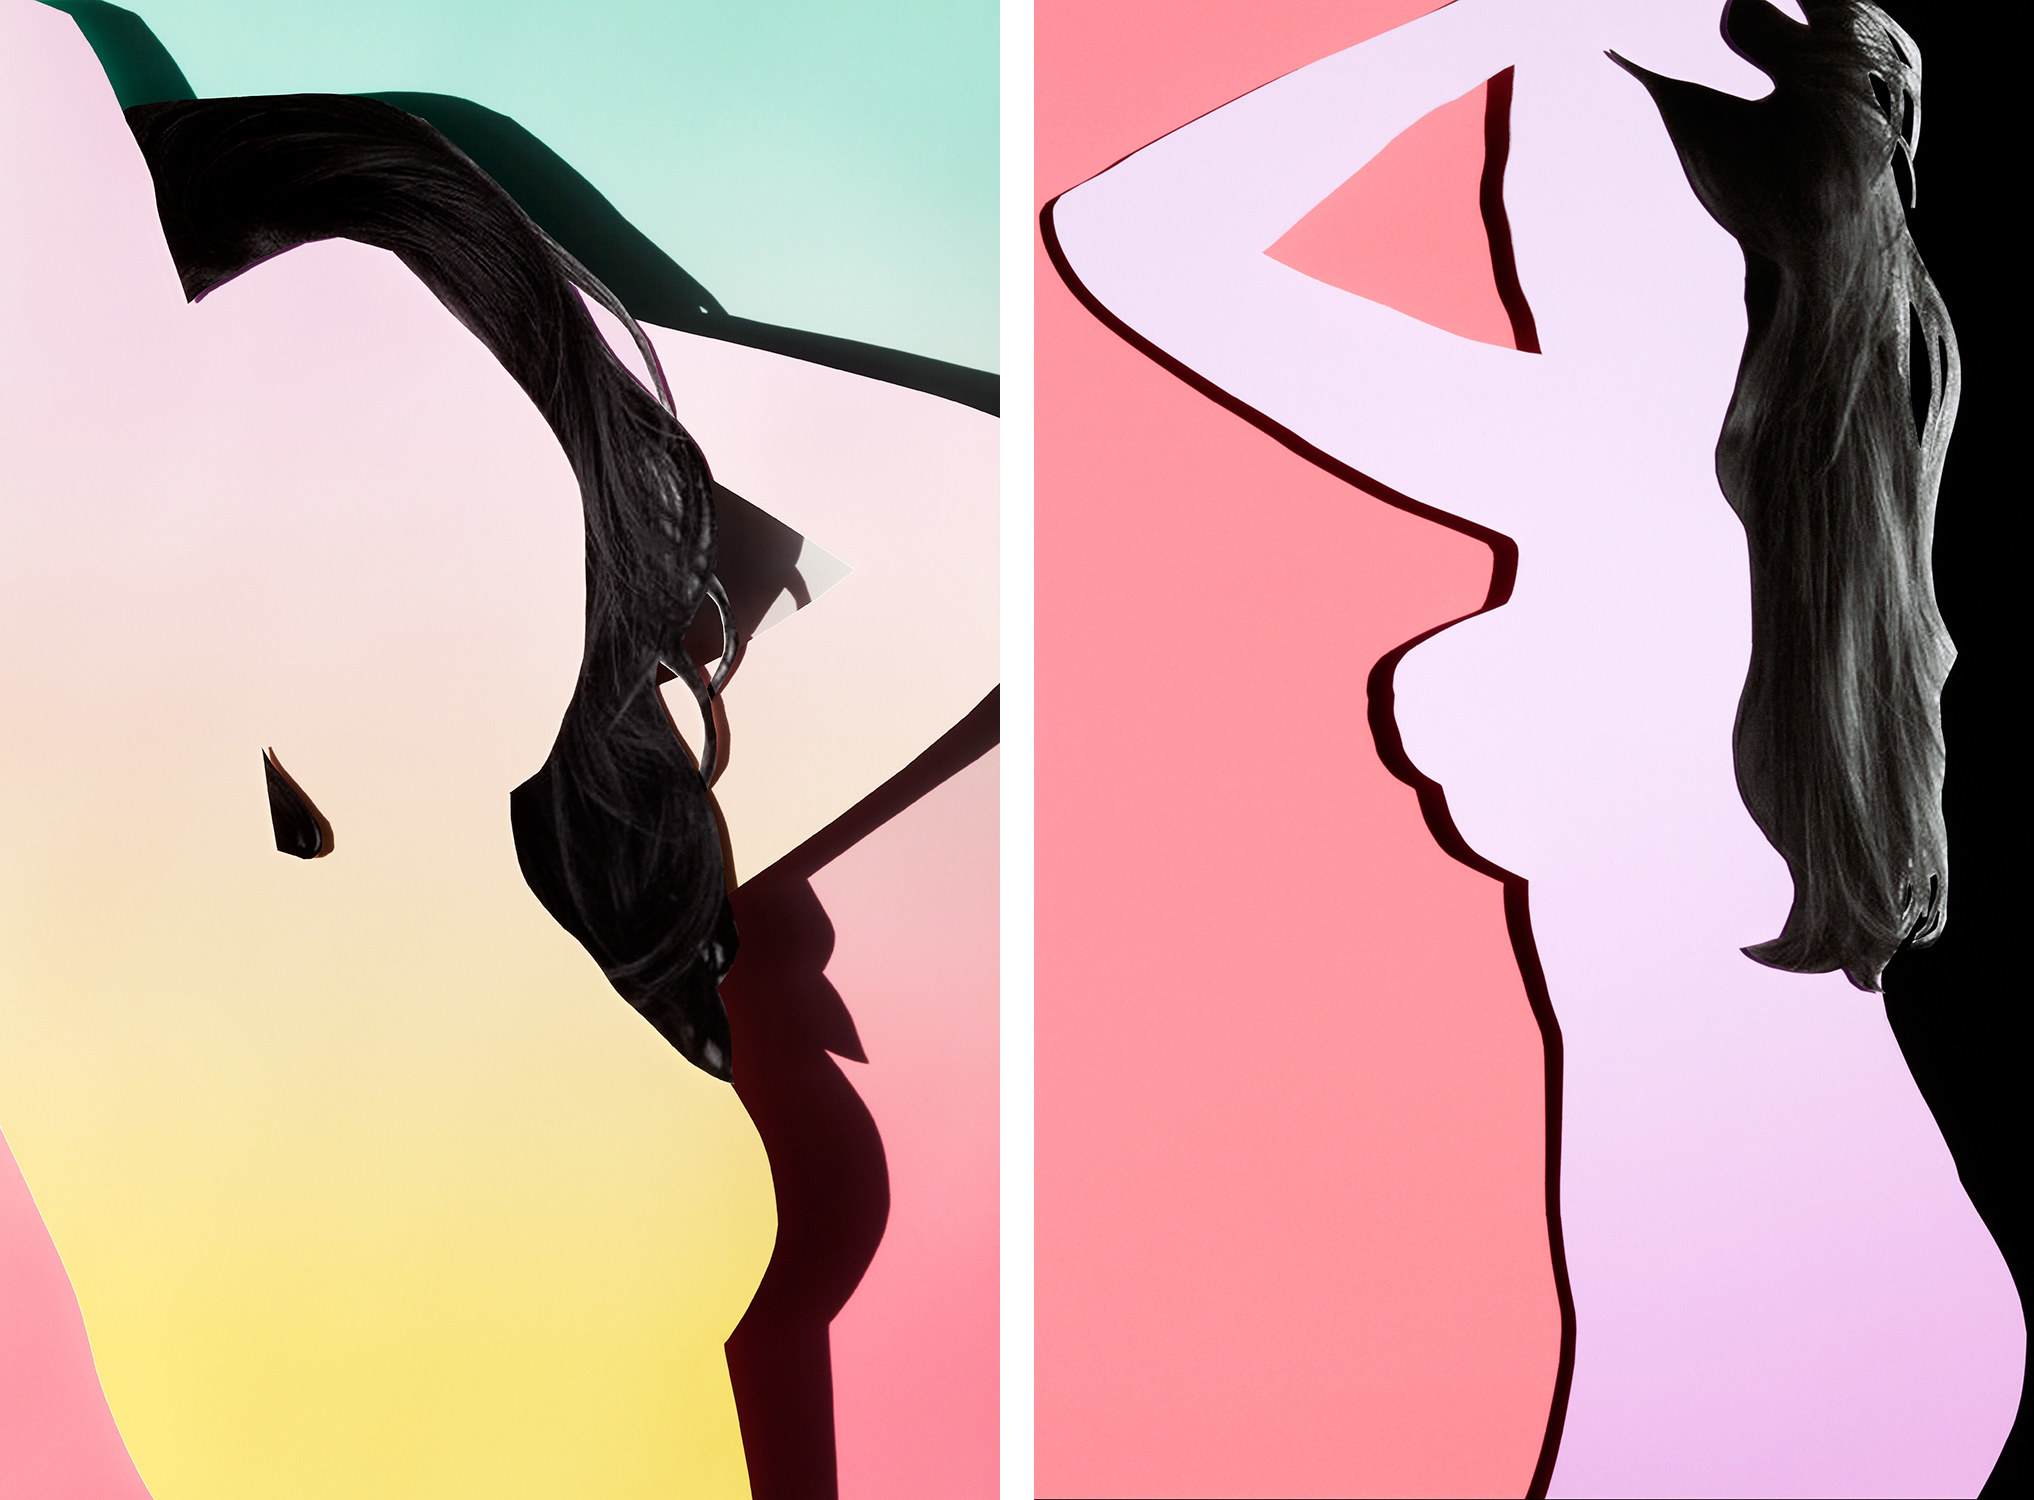 More cutouts and silhouettes without faces